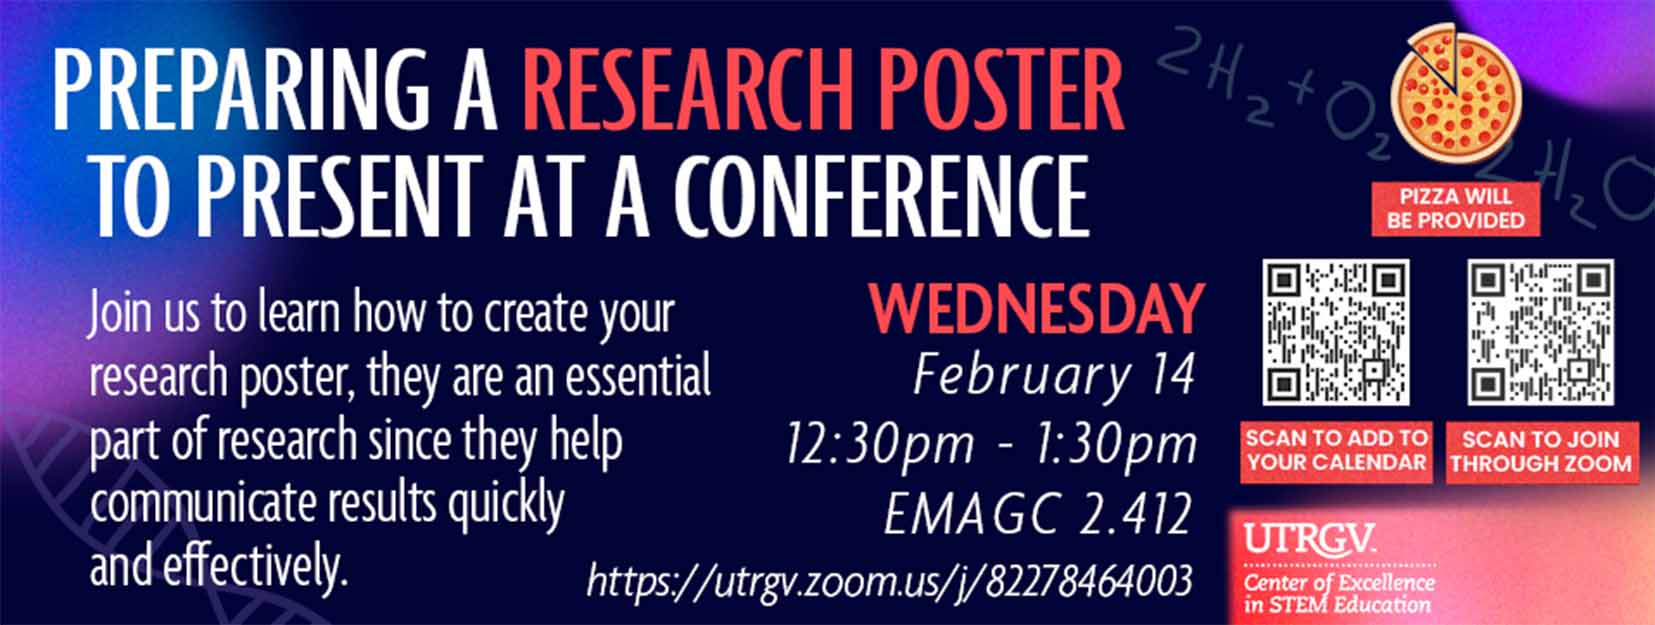 Preparing a Research Poster to present at a conference workshop 